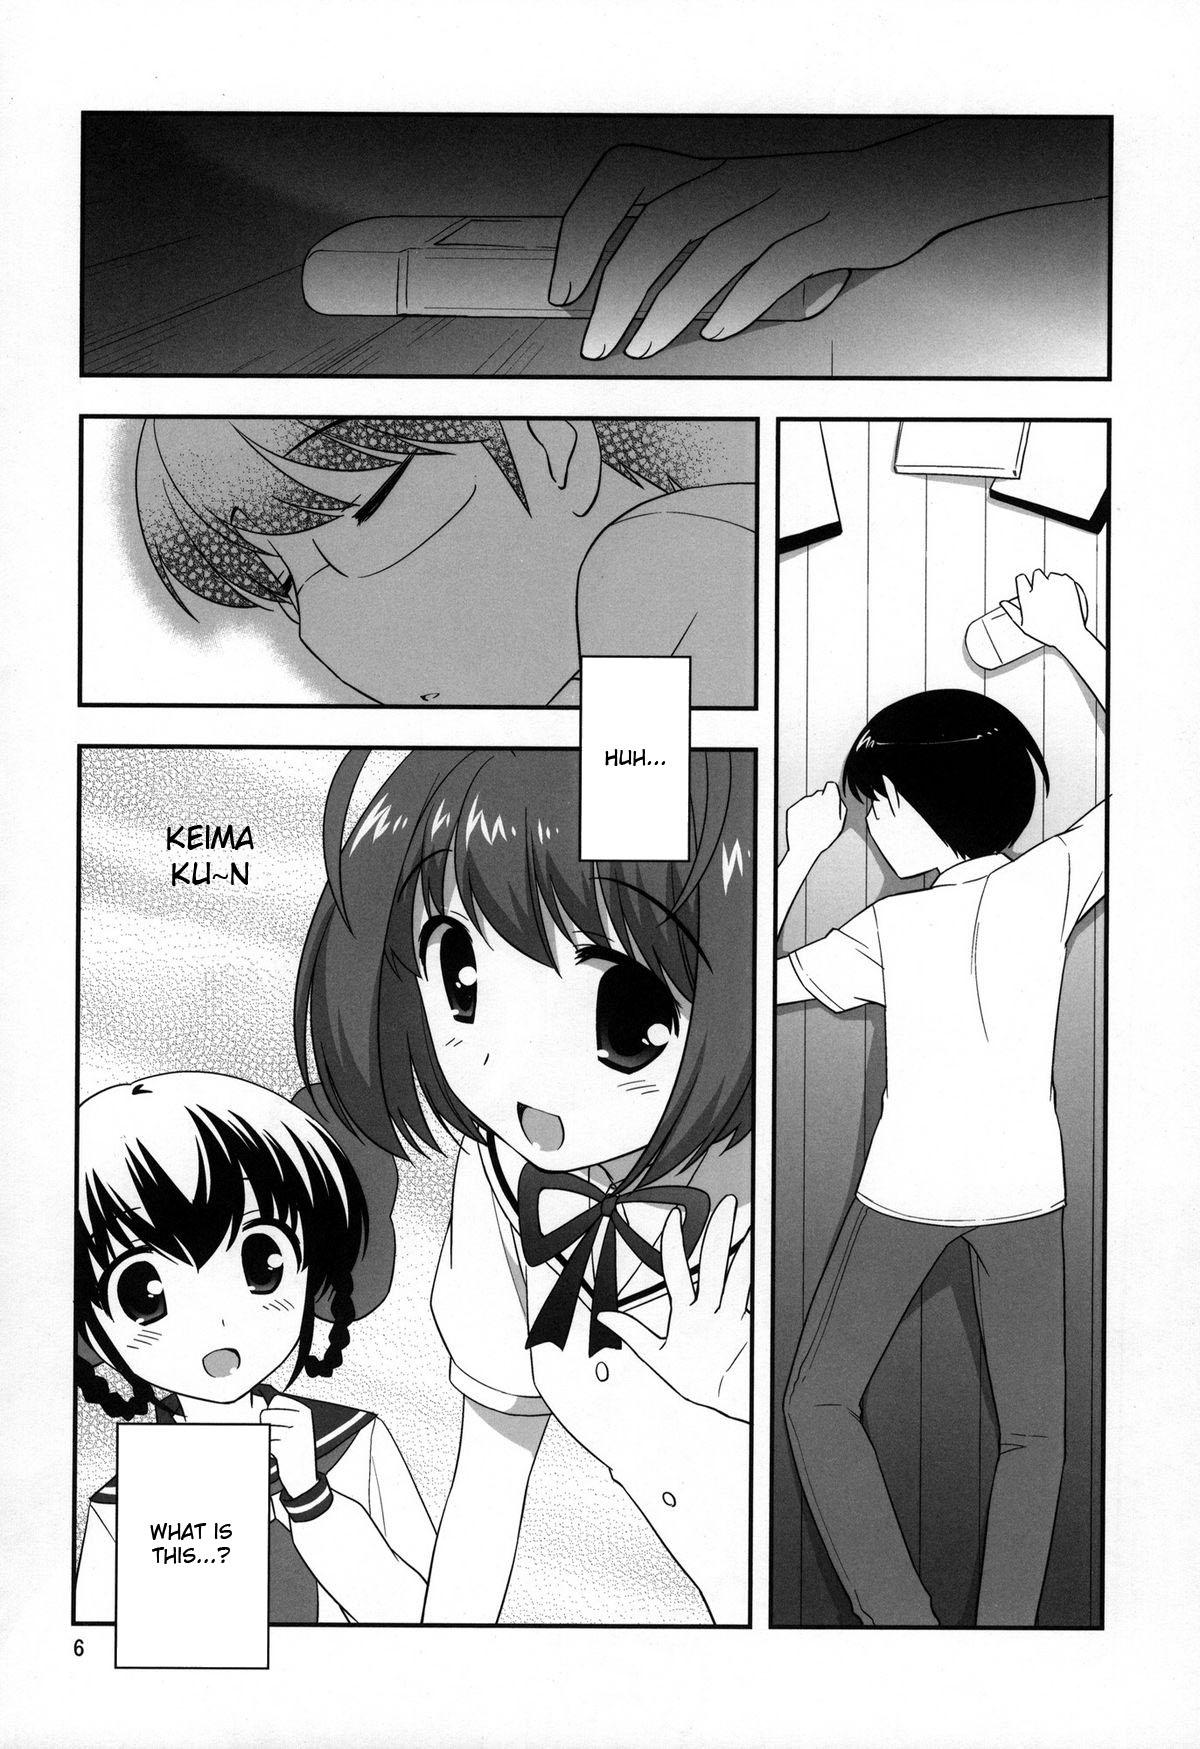 Atm Yokkyuuuuun! - The world god only knows Ohmibod - Page 5